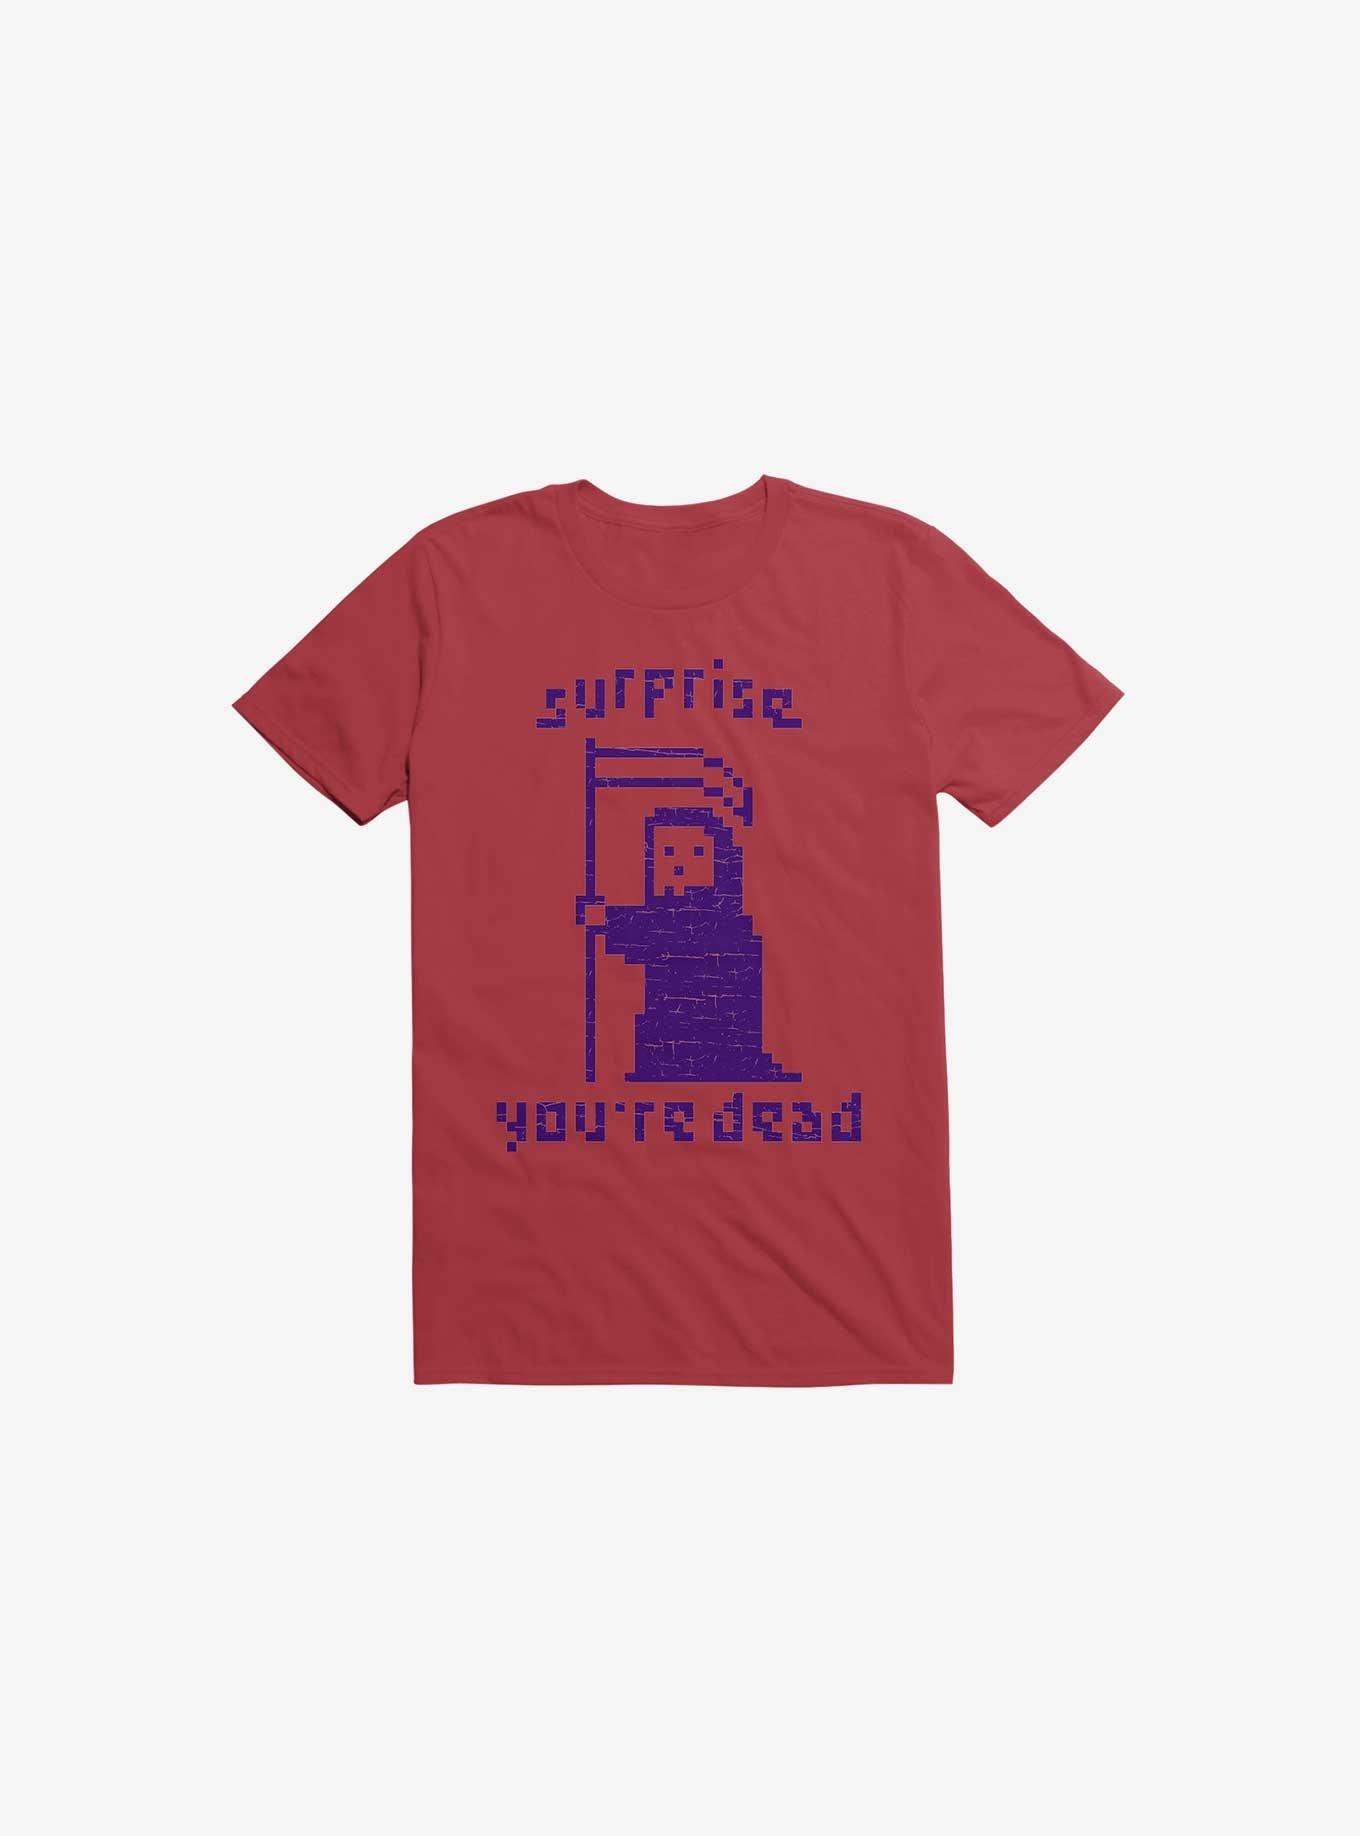 Surprise You're Dead Red T-Shirt, RED, hi-res